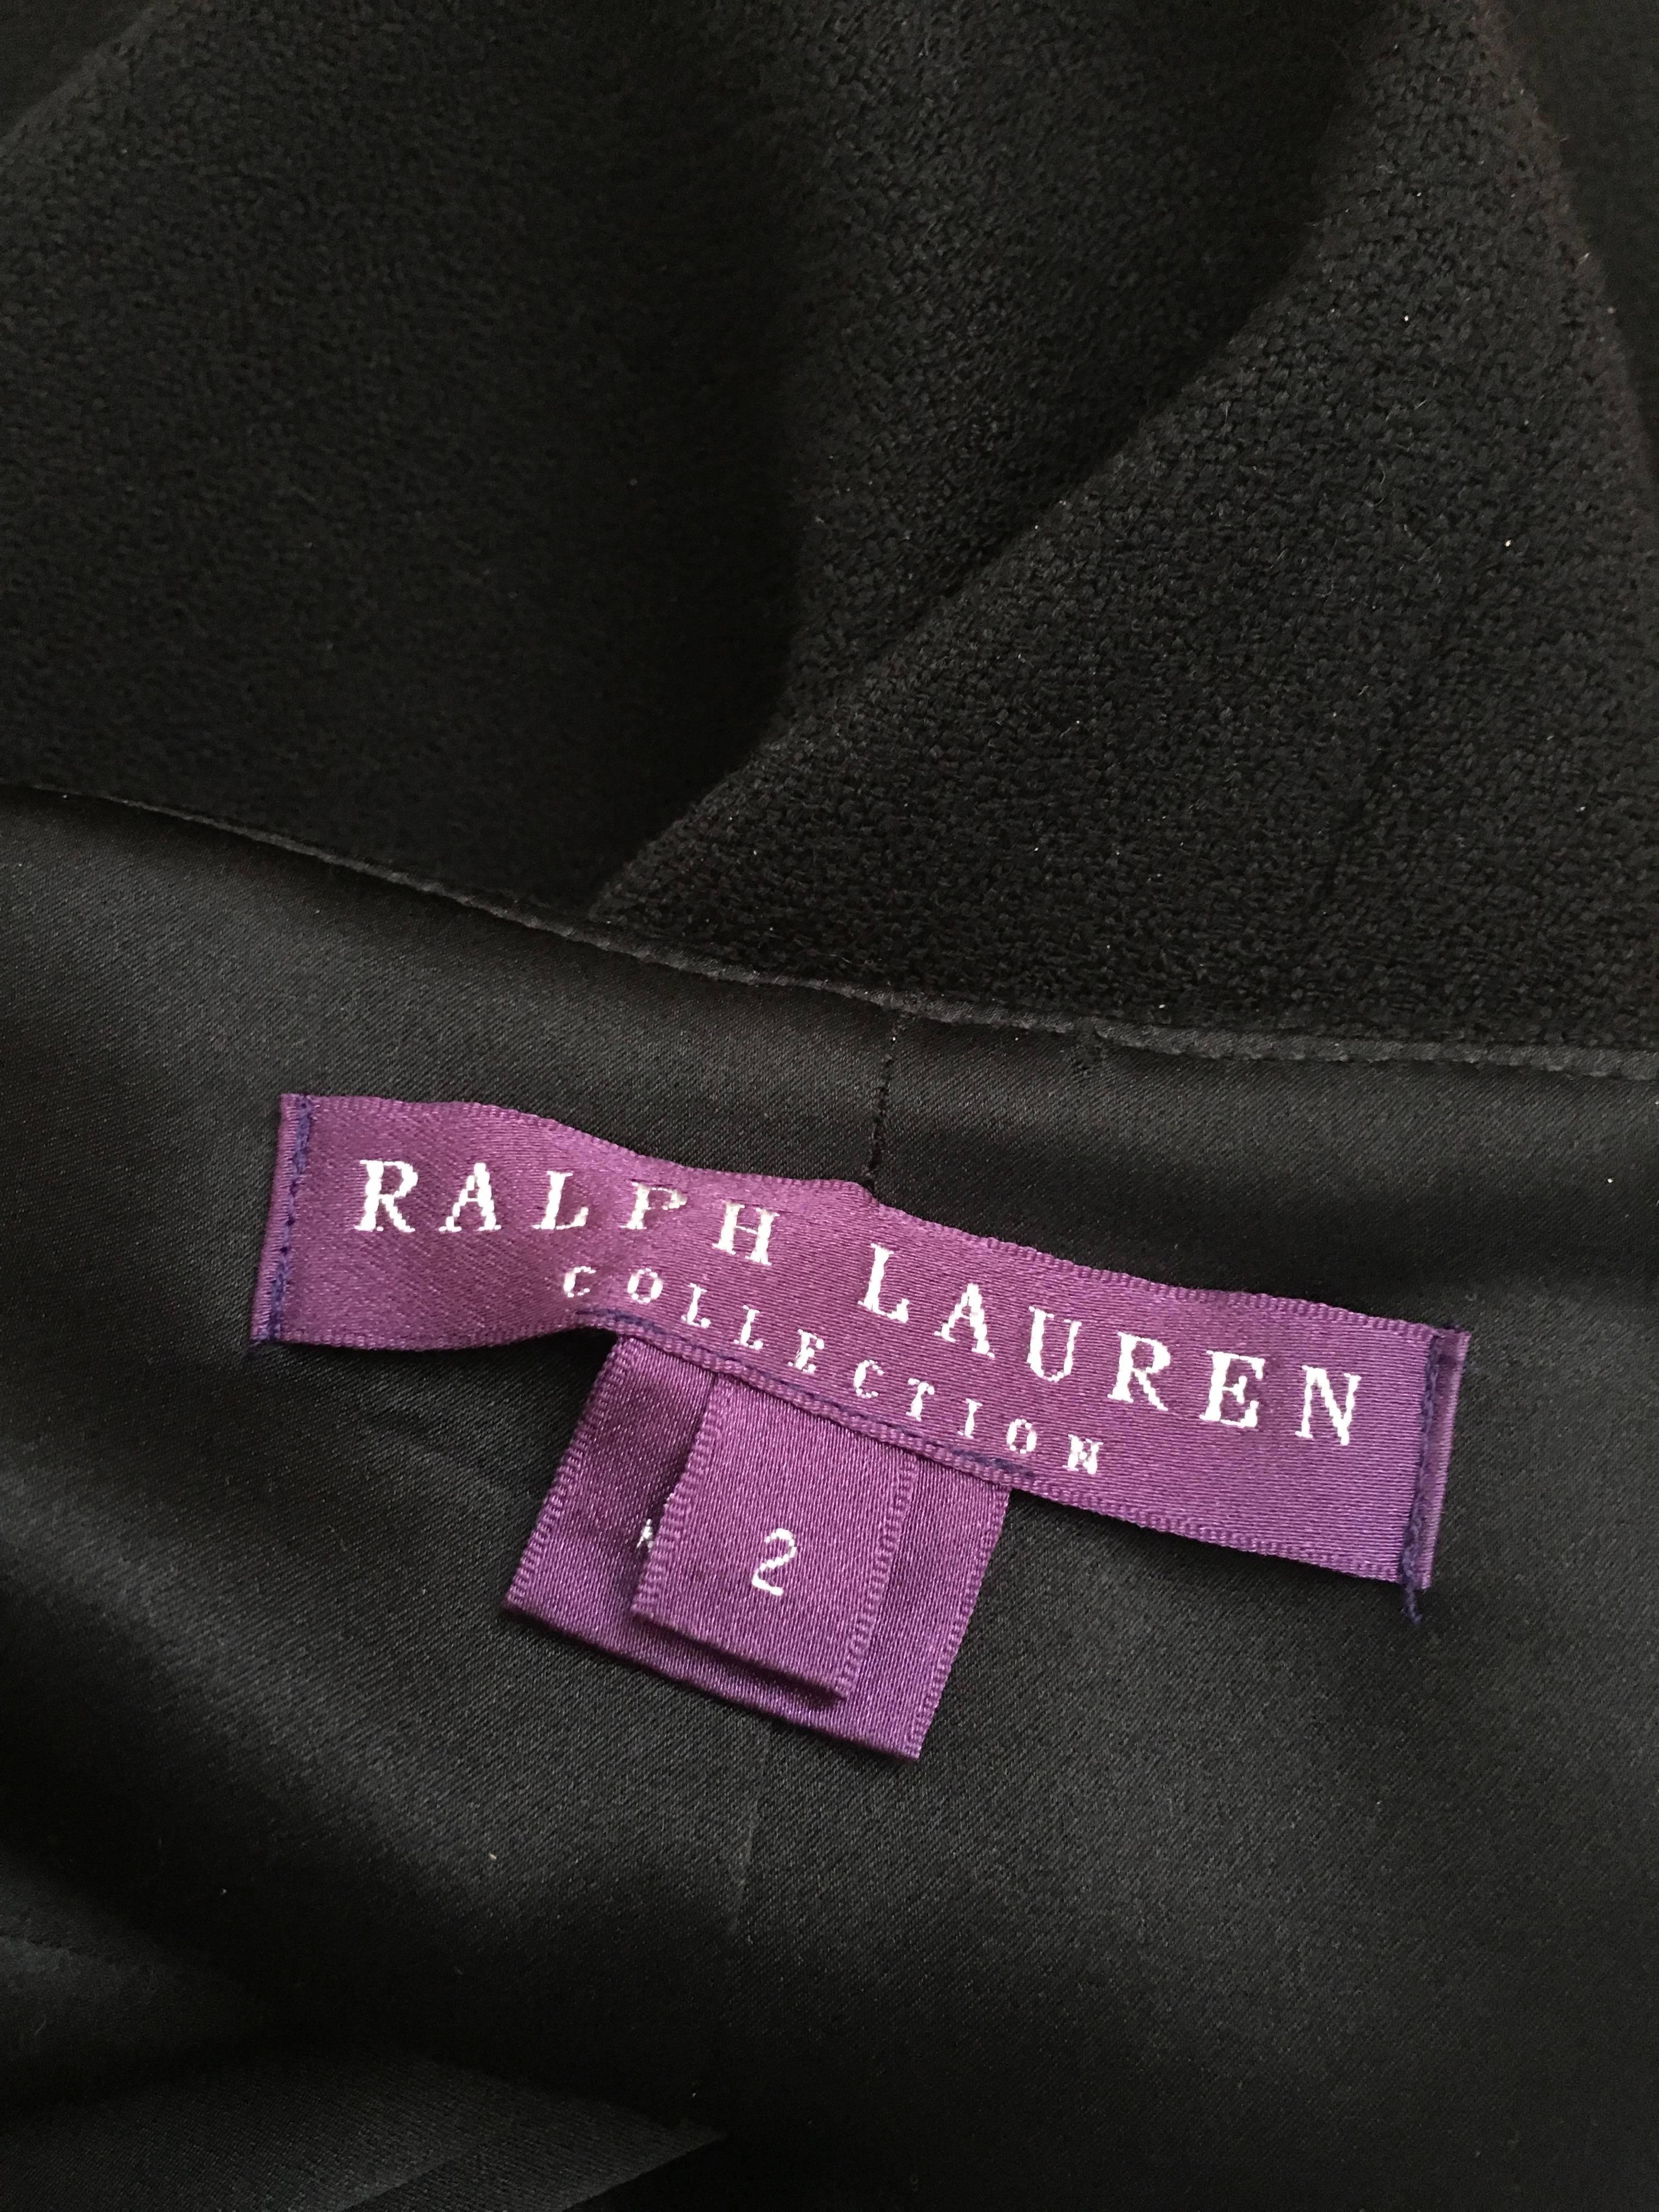 Ralph Lauren Collection Black Wool Pencil Skirt Size 2/4. For Sale 3